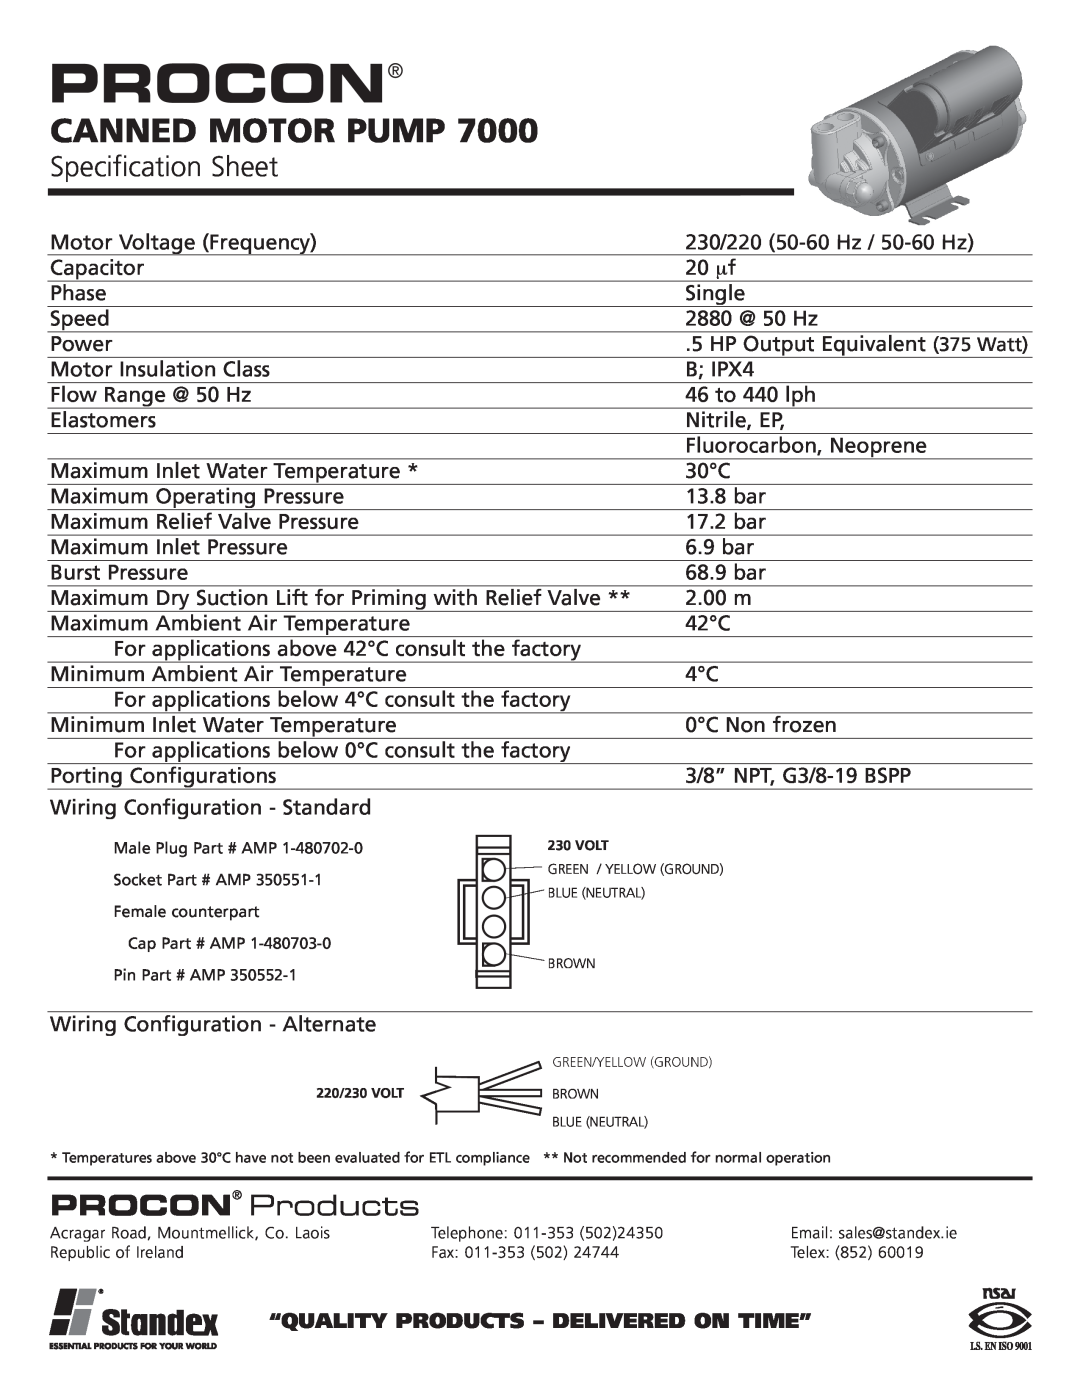 Bakers Pride Oven 7000 specifications Procon, Canned Motor Pump, Specification Sheet, PROCON Products 